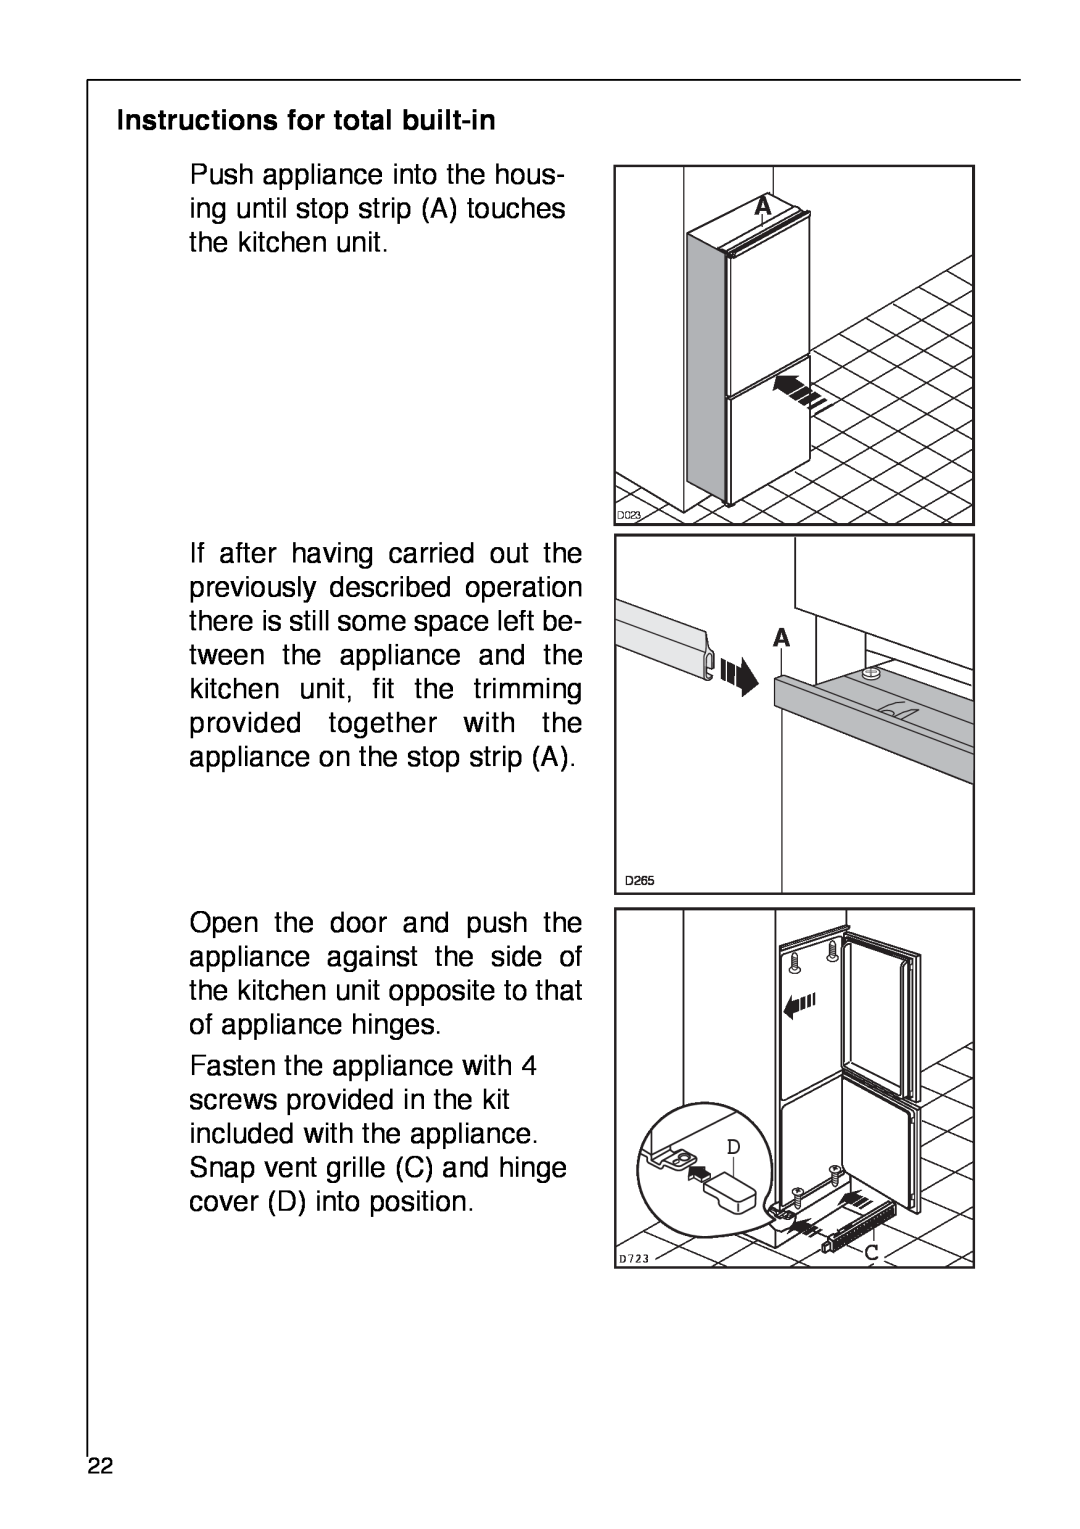 Electrolux SANTO 2842-4 i installation instructions Instructions for total built-in 